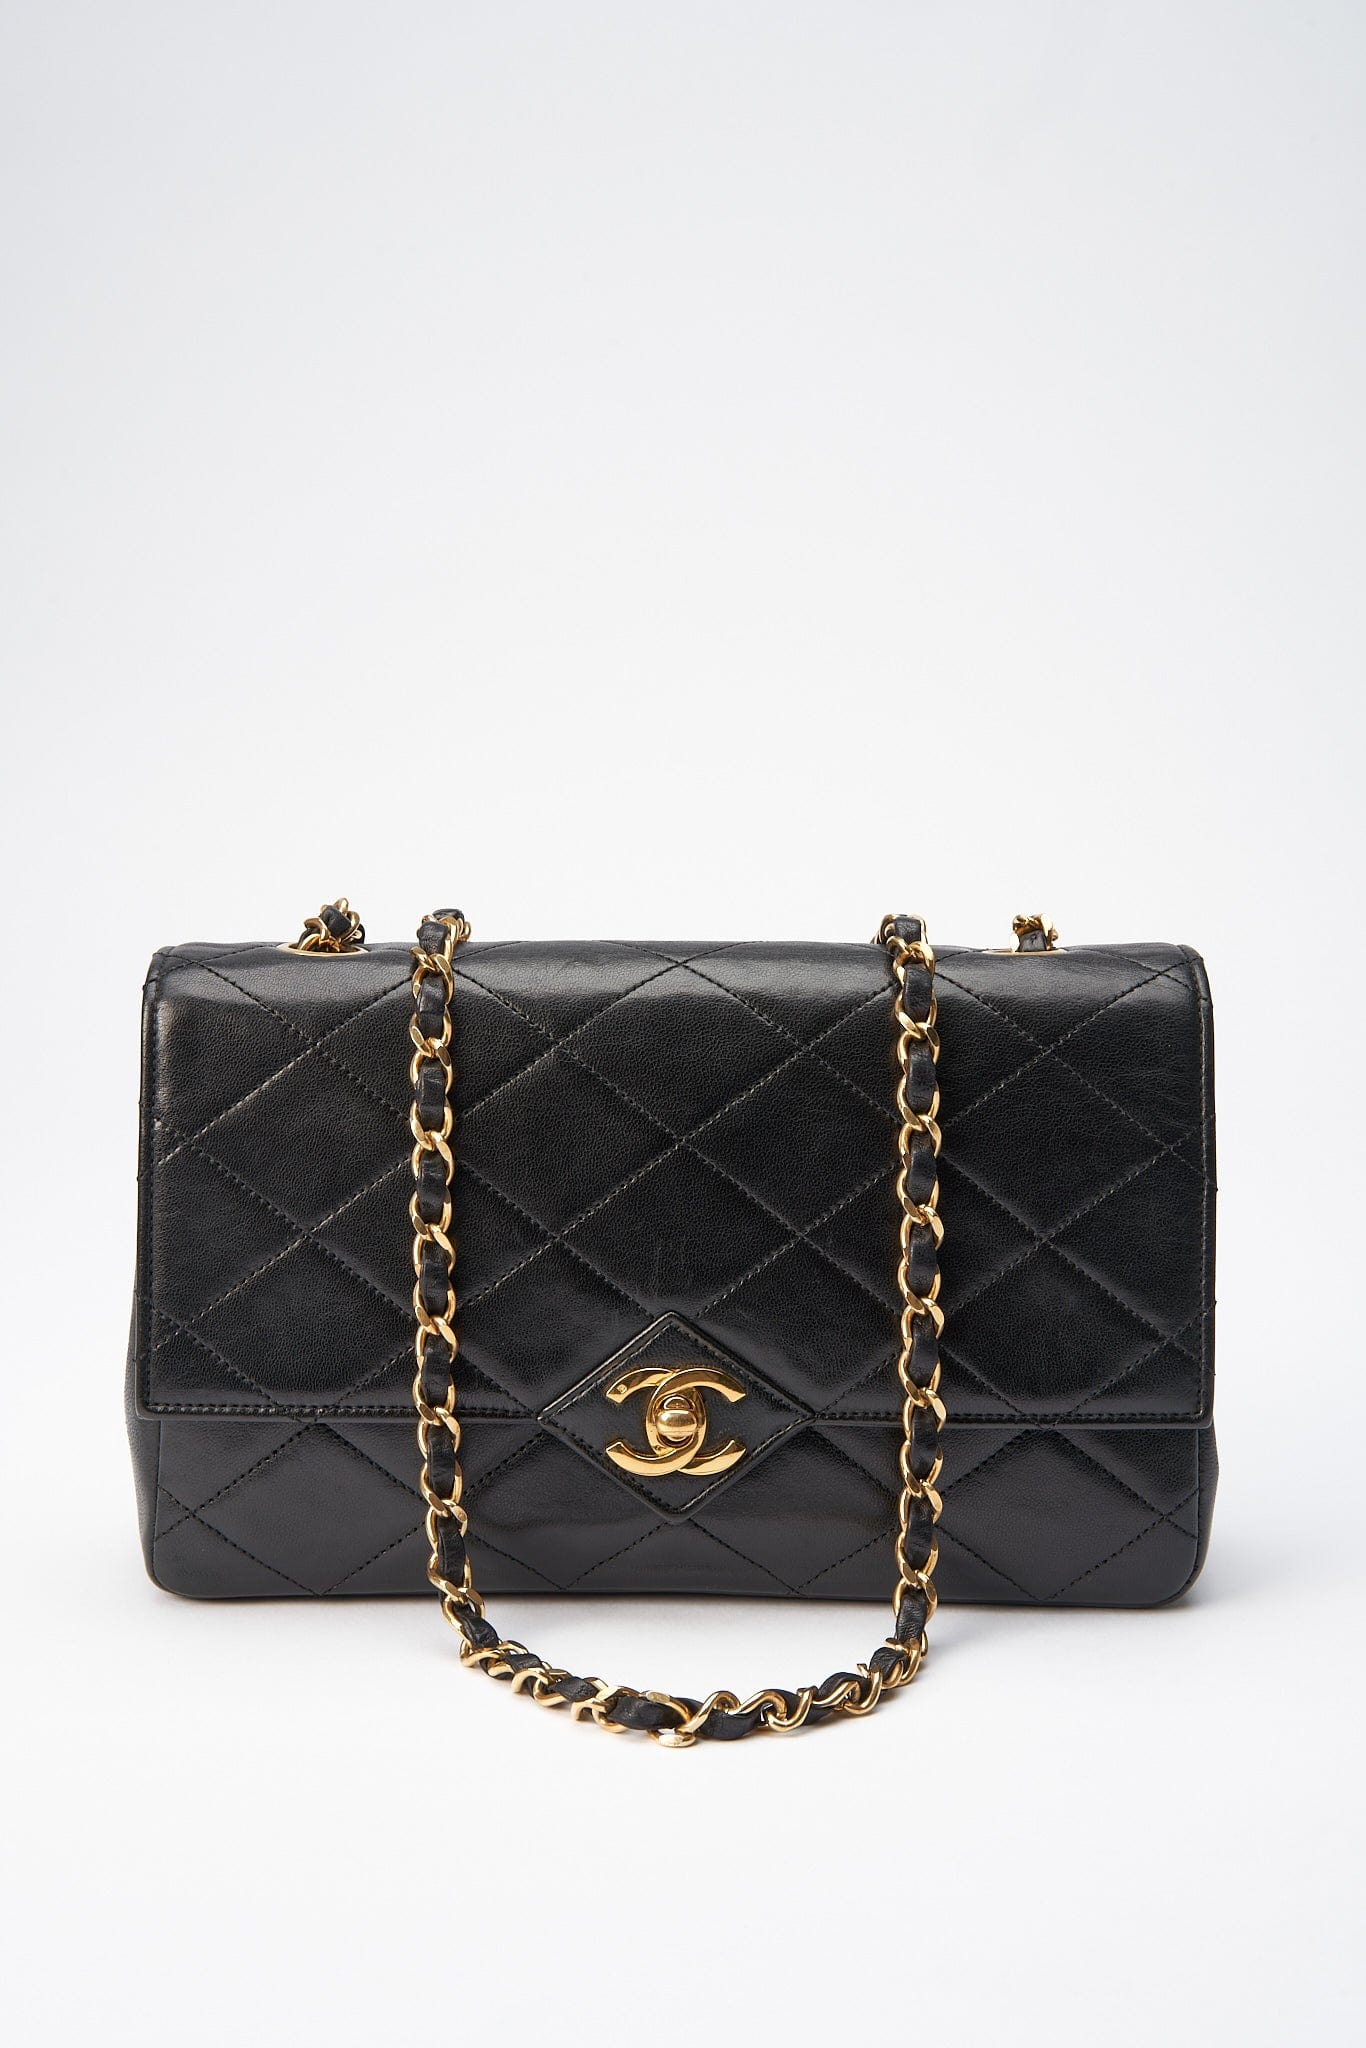 Chanel Vintage Black Top Handle Bag in Caviar Leather with 24K